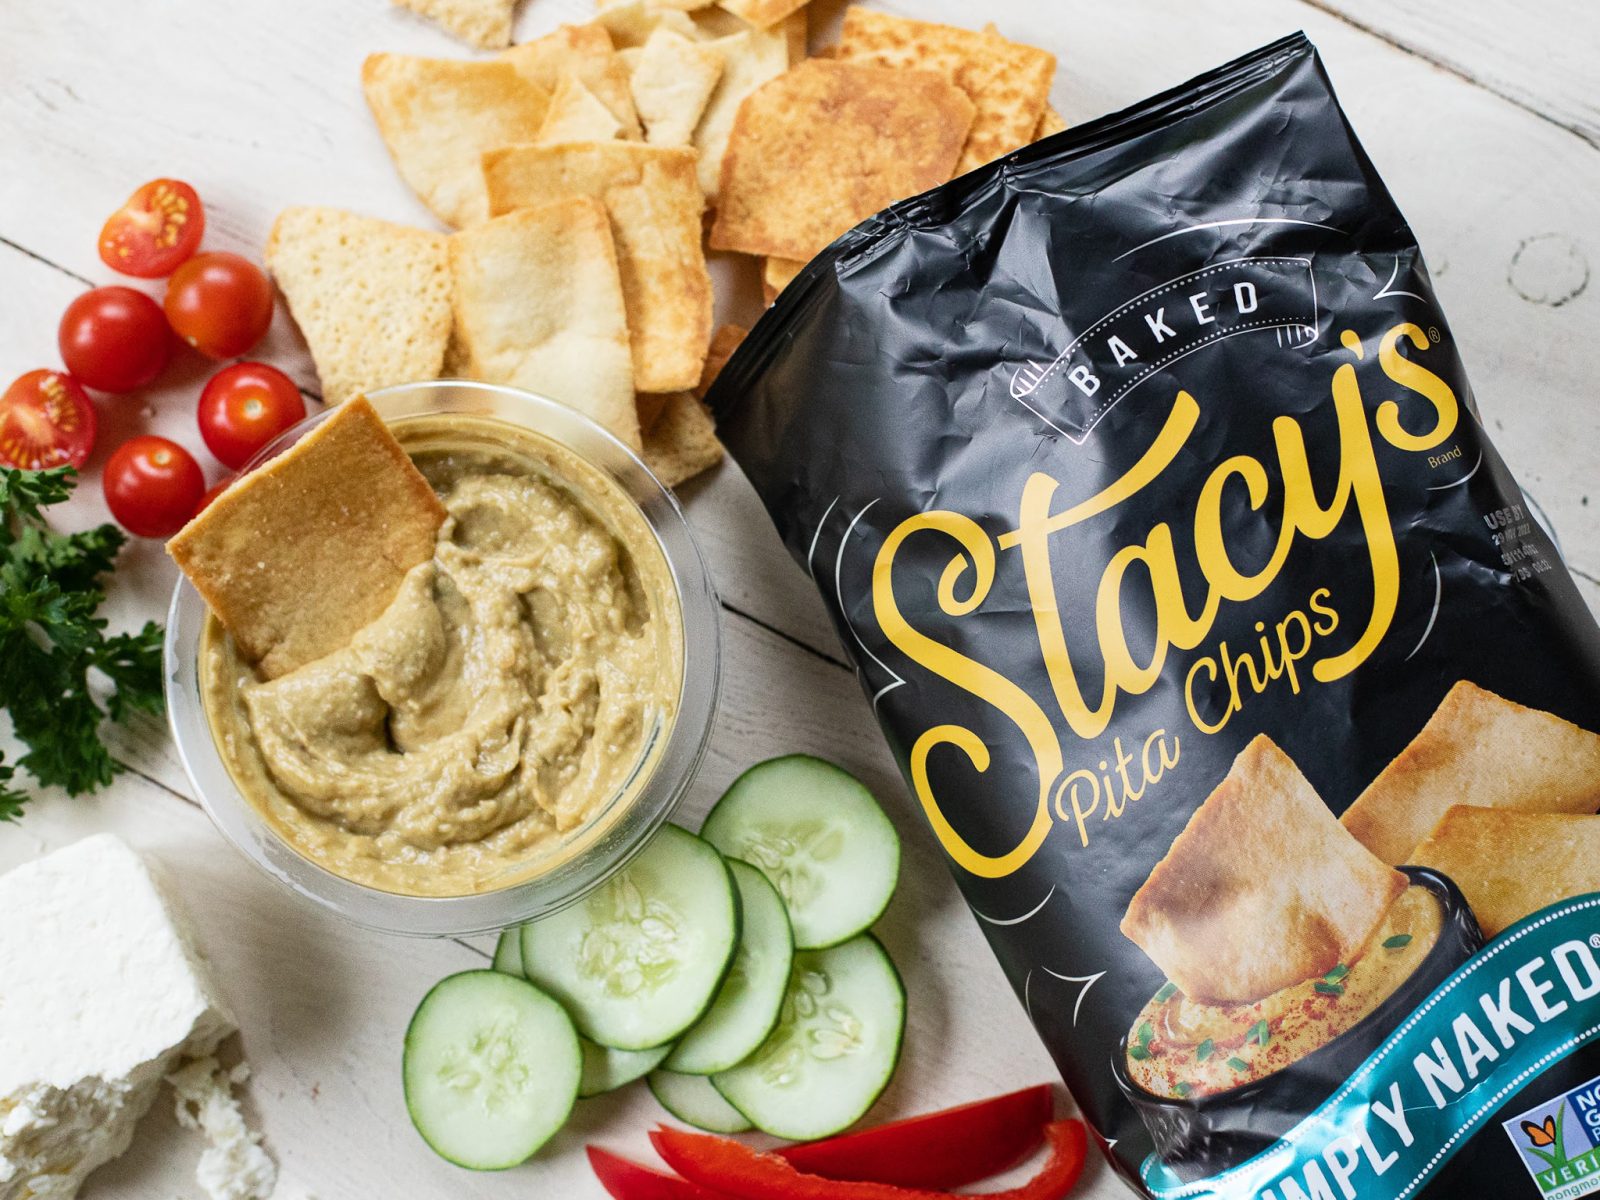 Stacy’s Pita Chips Are As Low As $1.99 At Kroger (Regular Price $4.99)